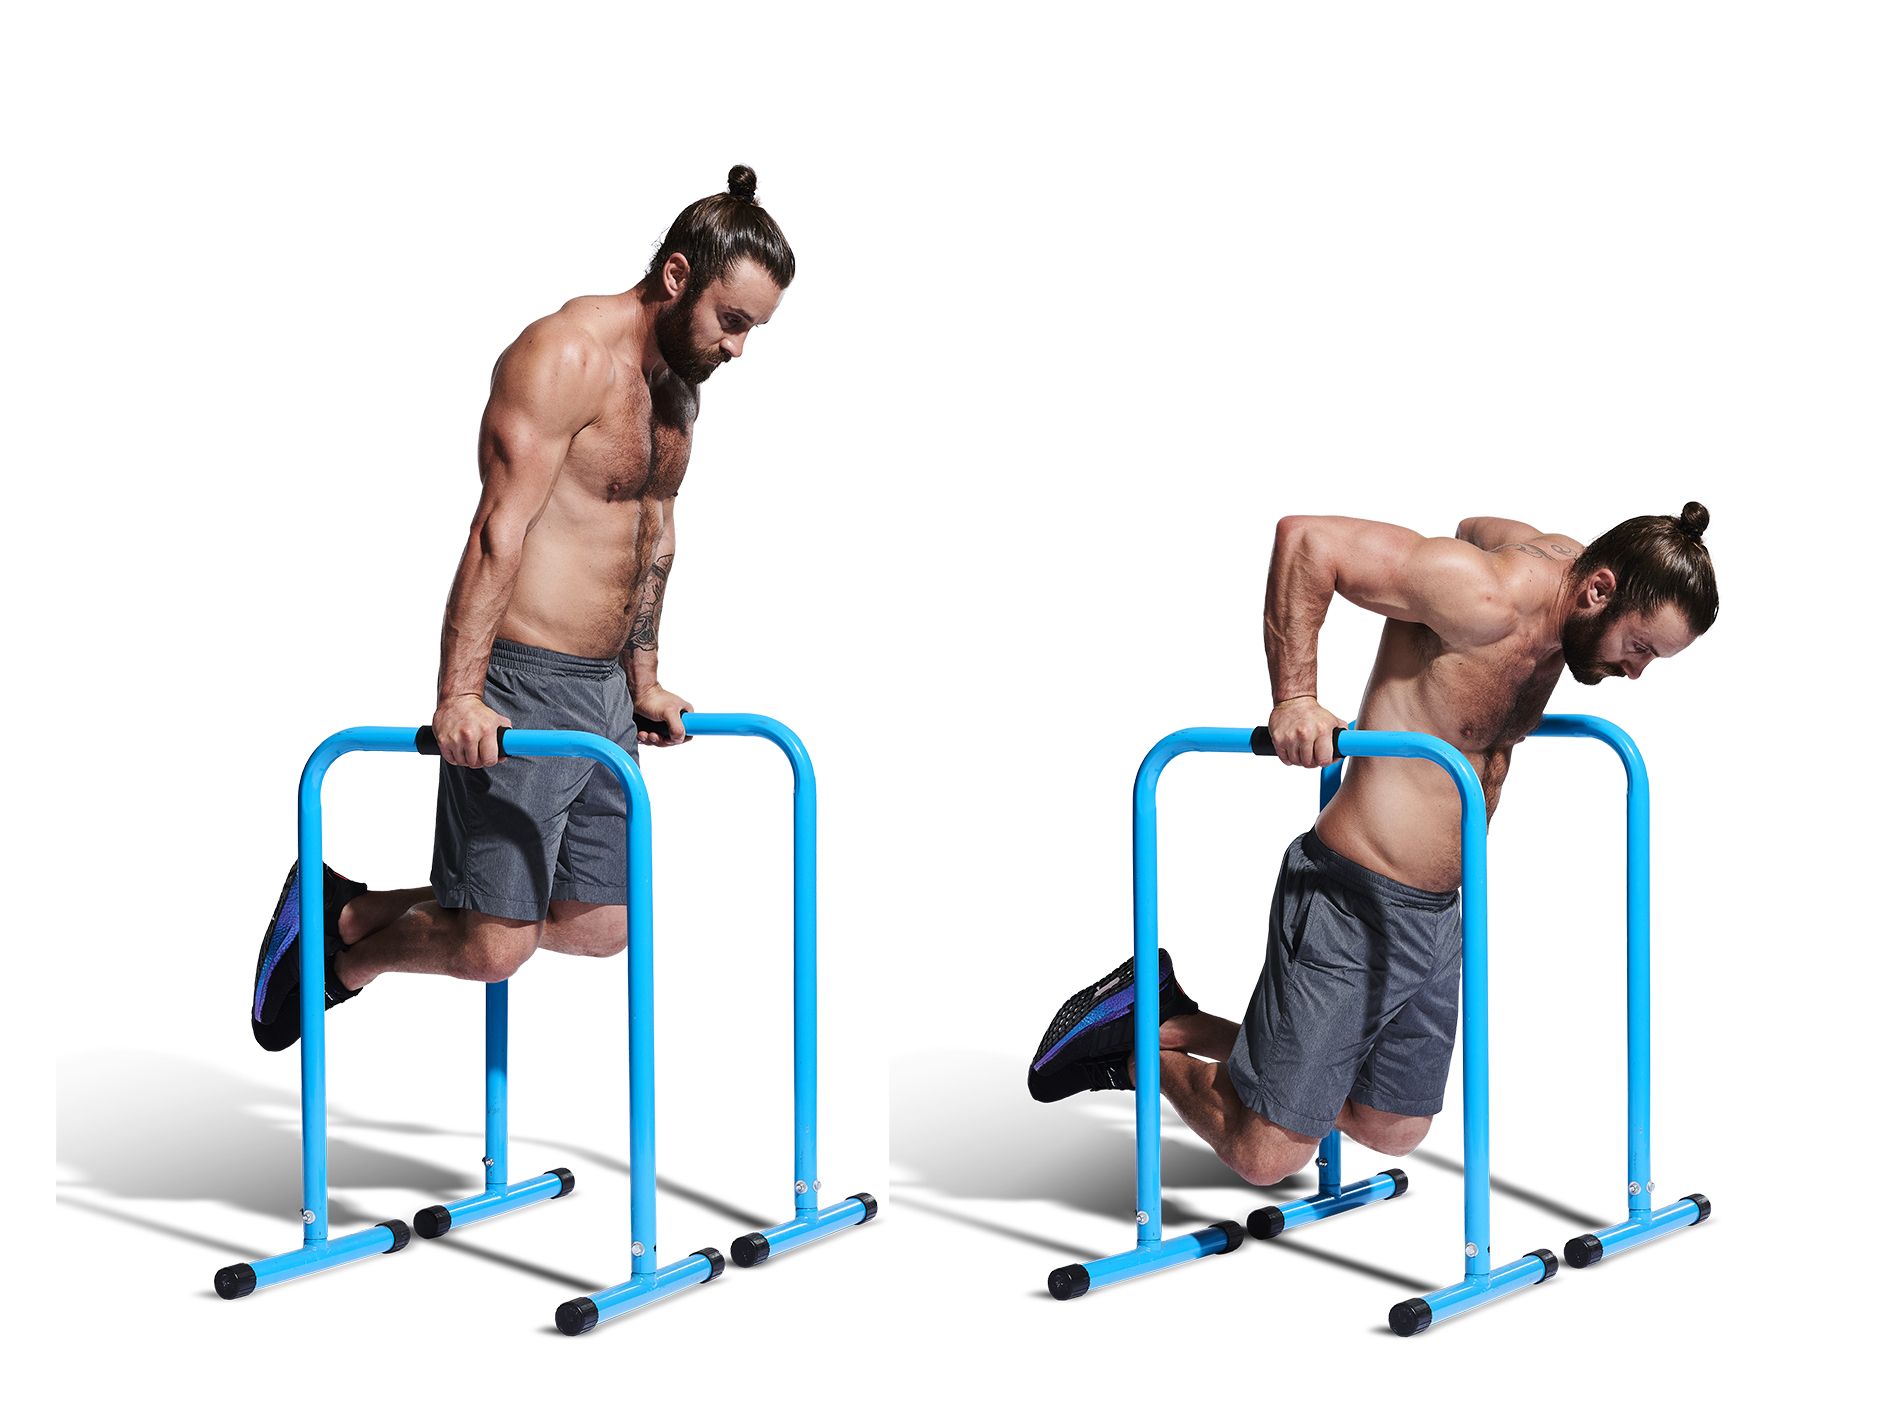 Keep fit without exercise equipment with the ISO-MICRO-GYM